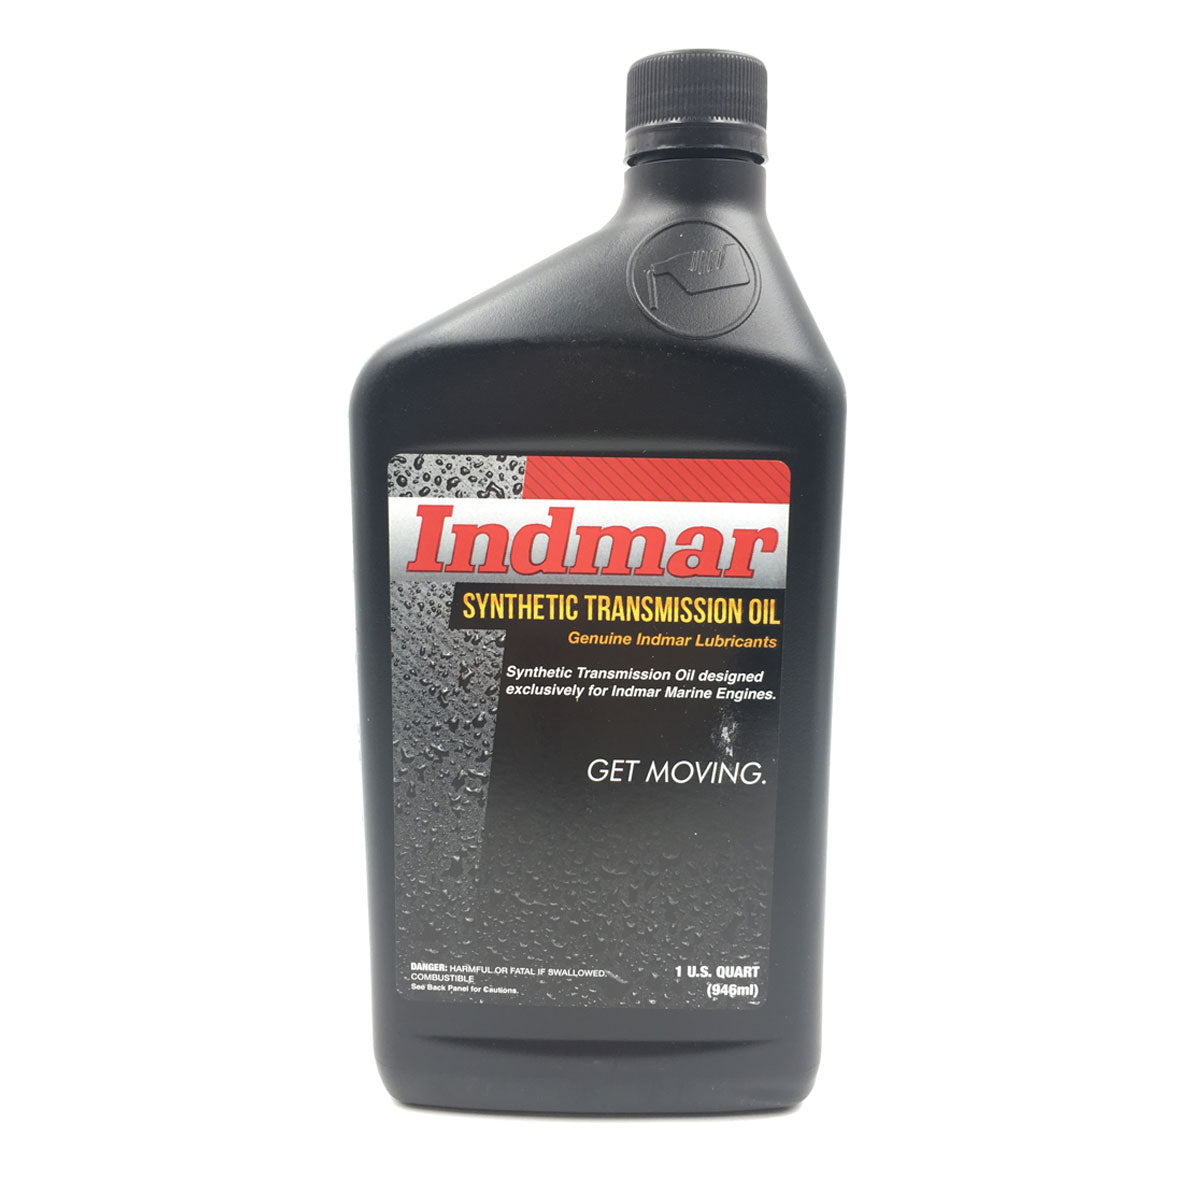 Indmar Synthetic Transmission Oil